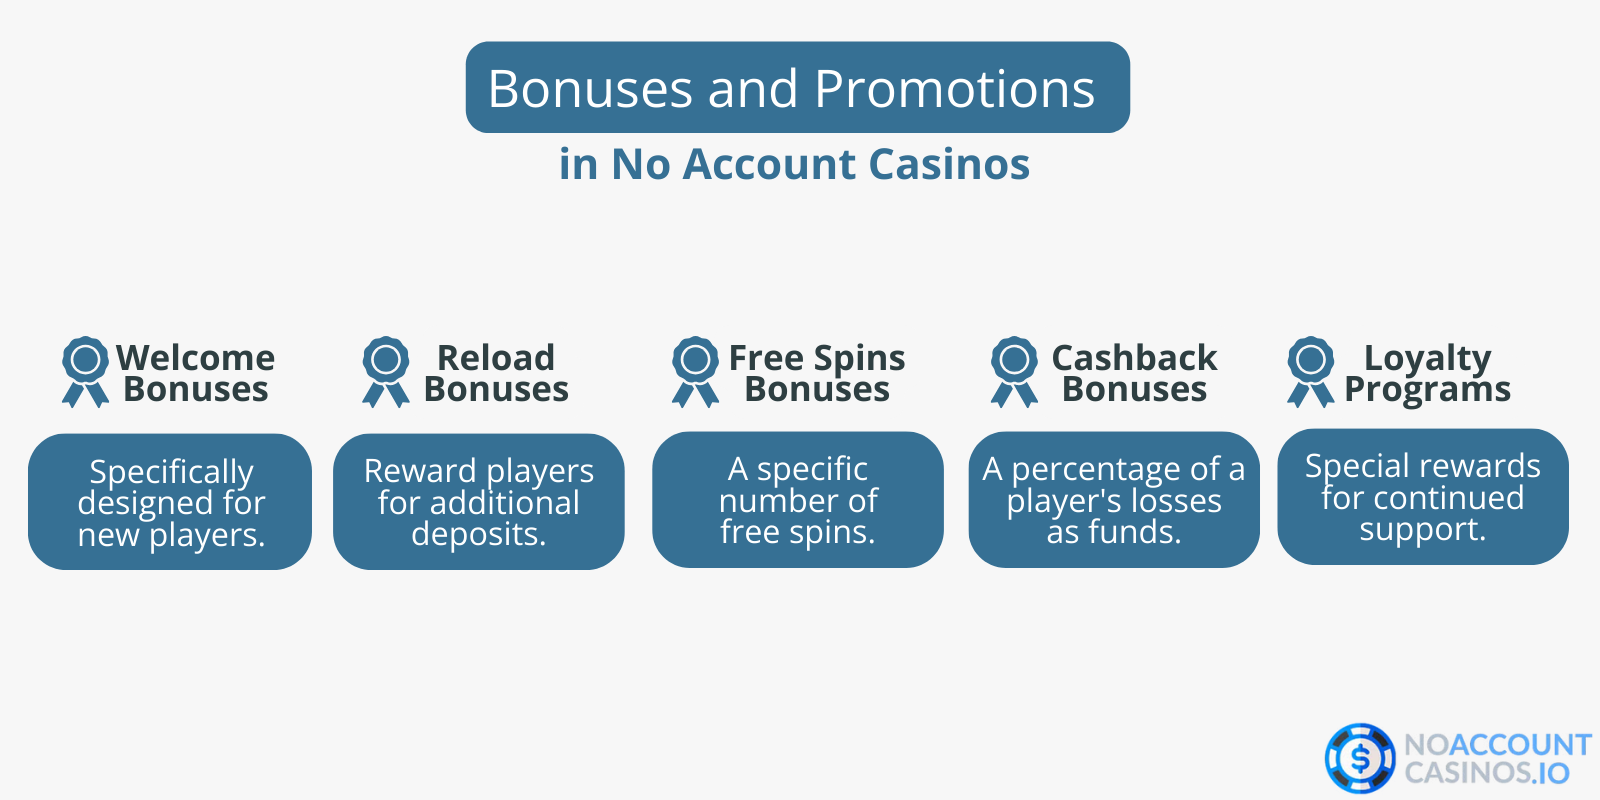 bonuses_and_promotions_in_no_account_casinos